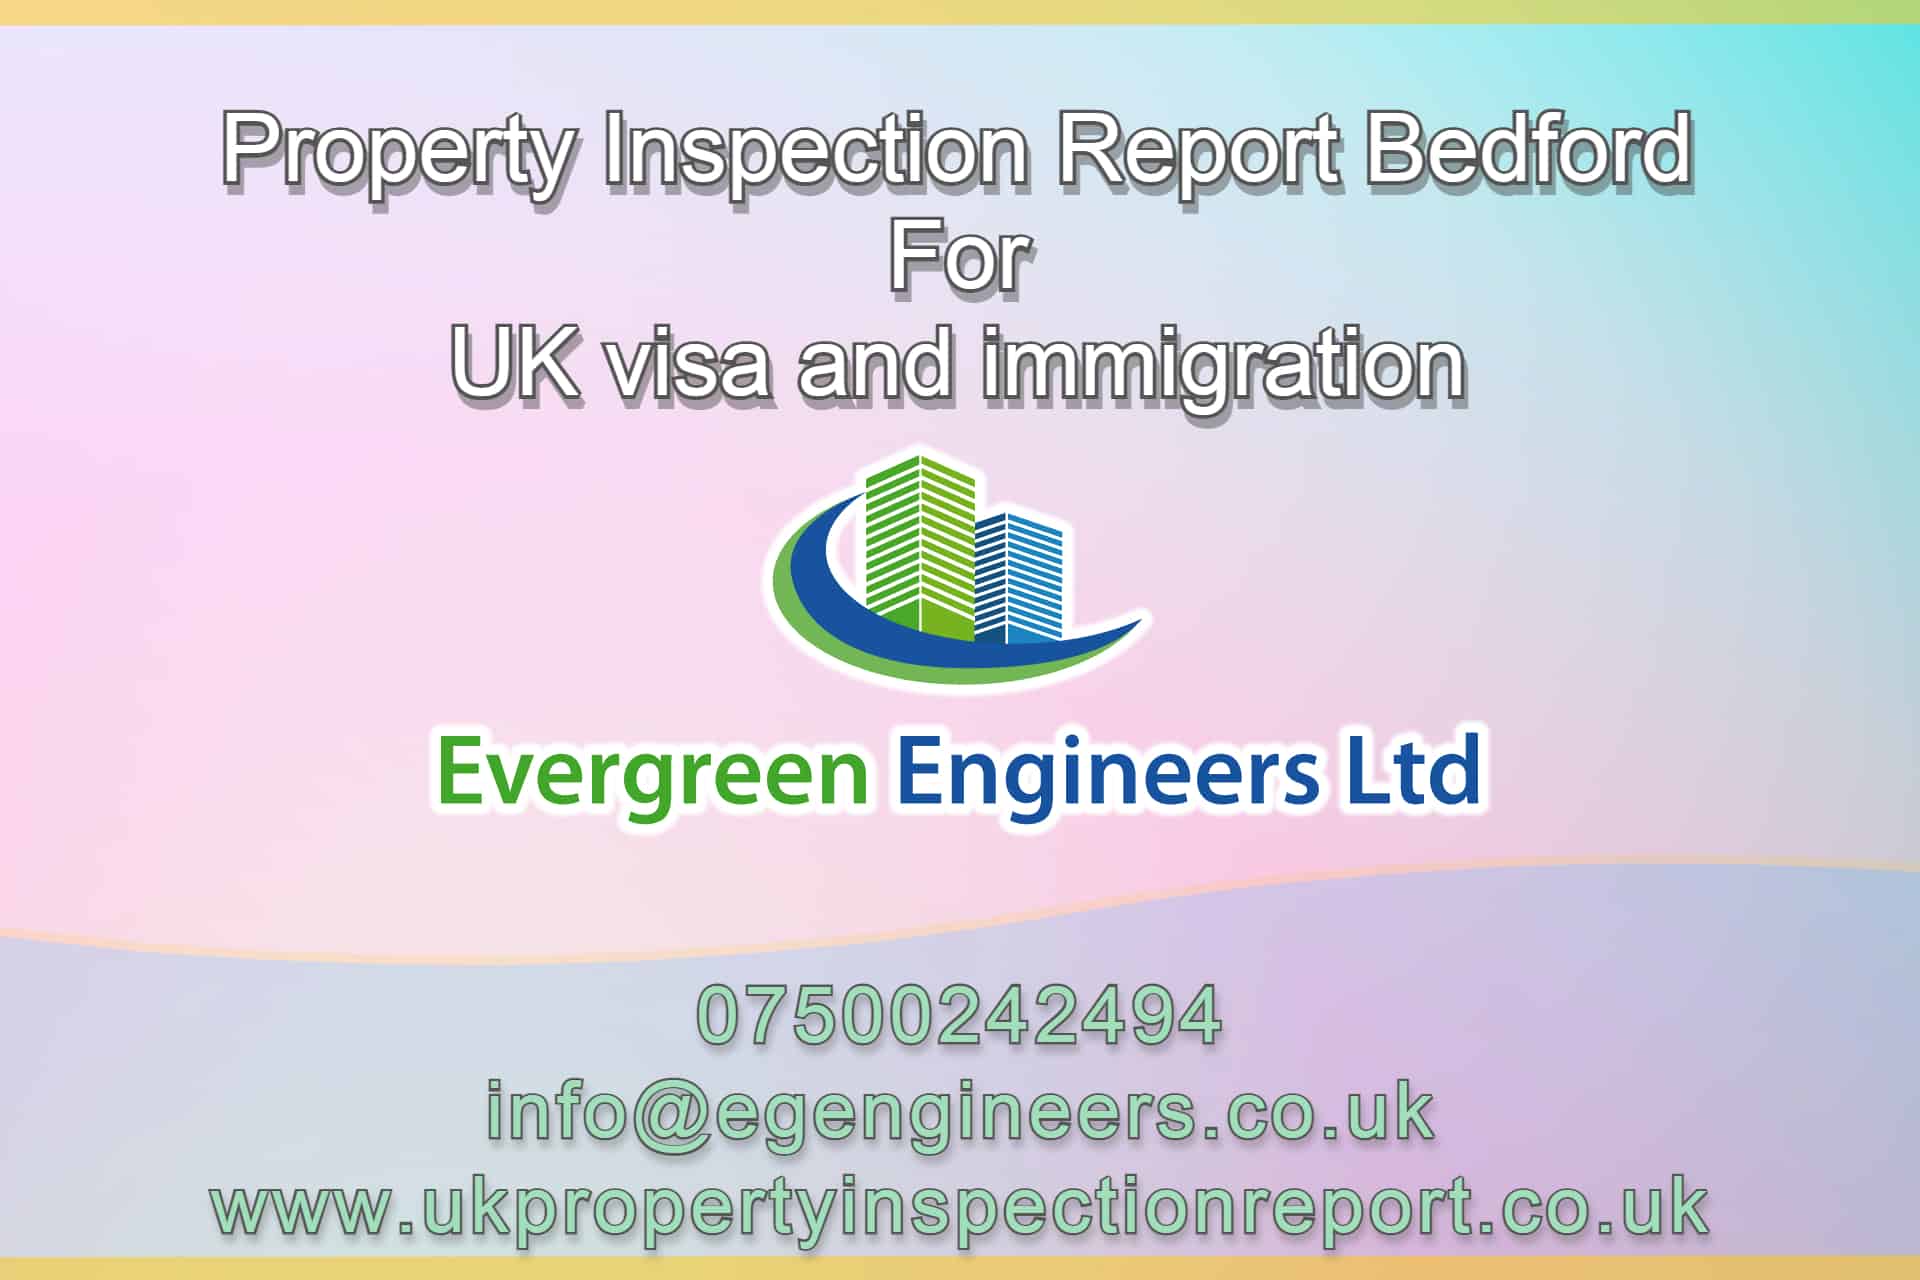 PROPERTY INSPECTION REPORT BEDFORD